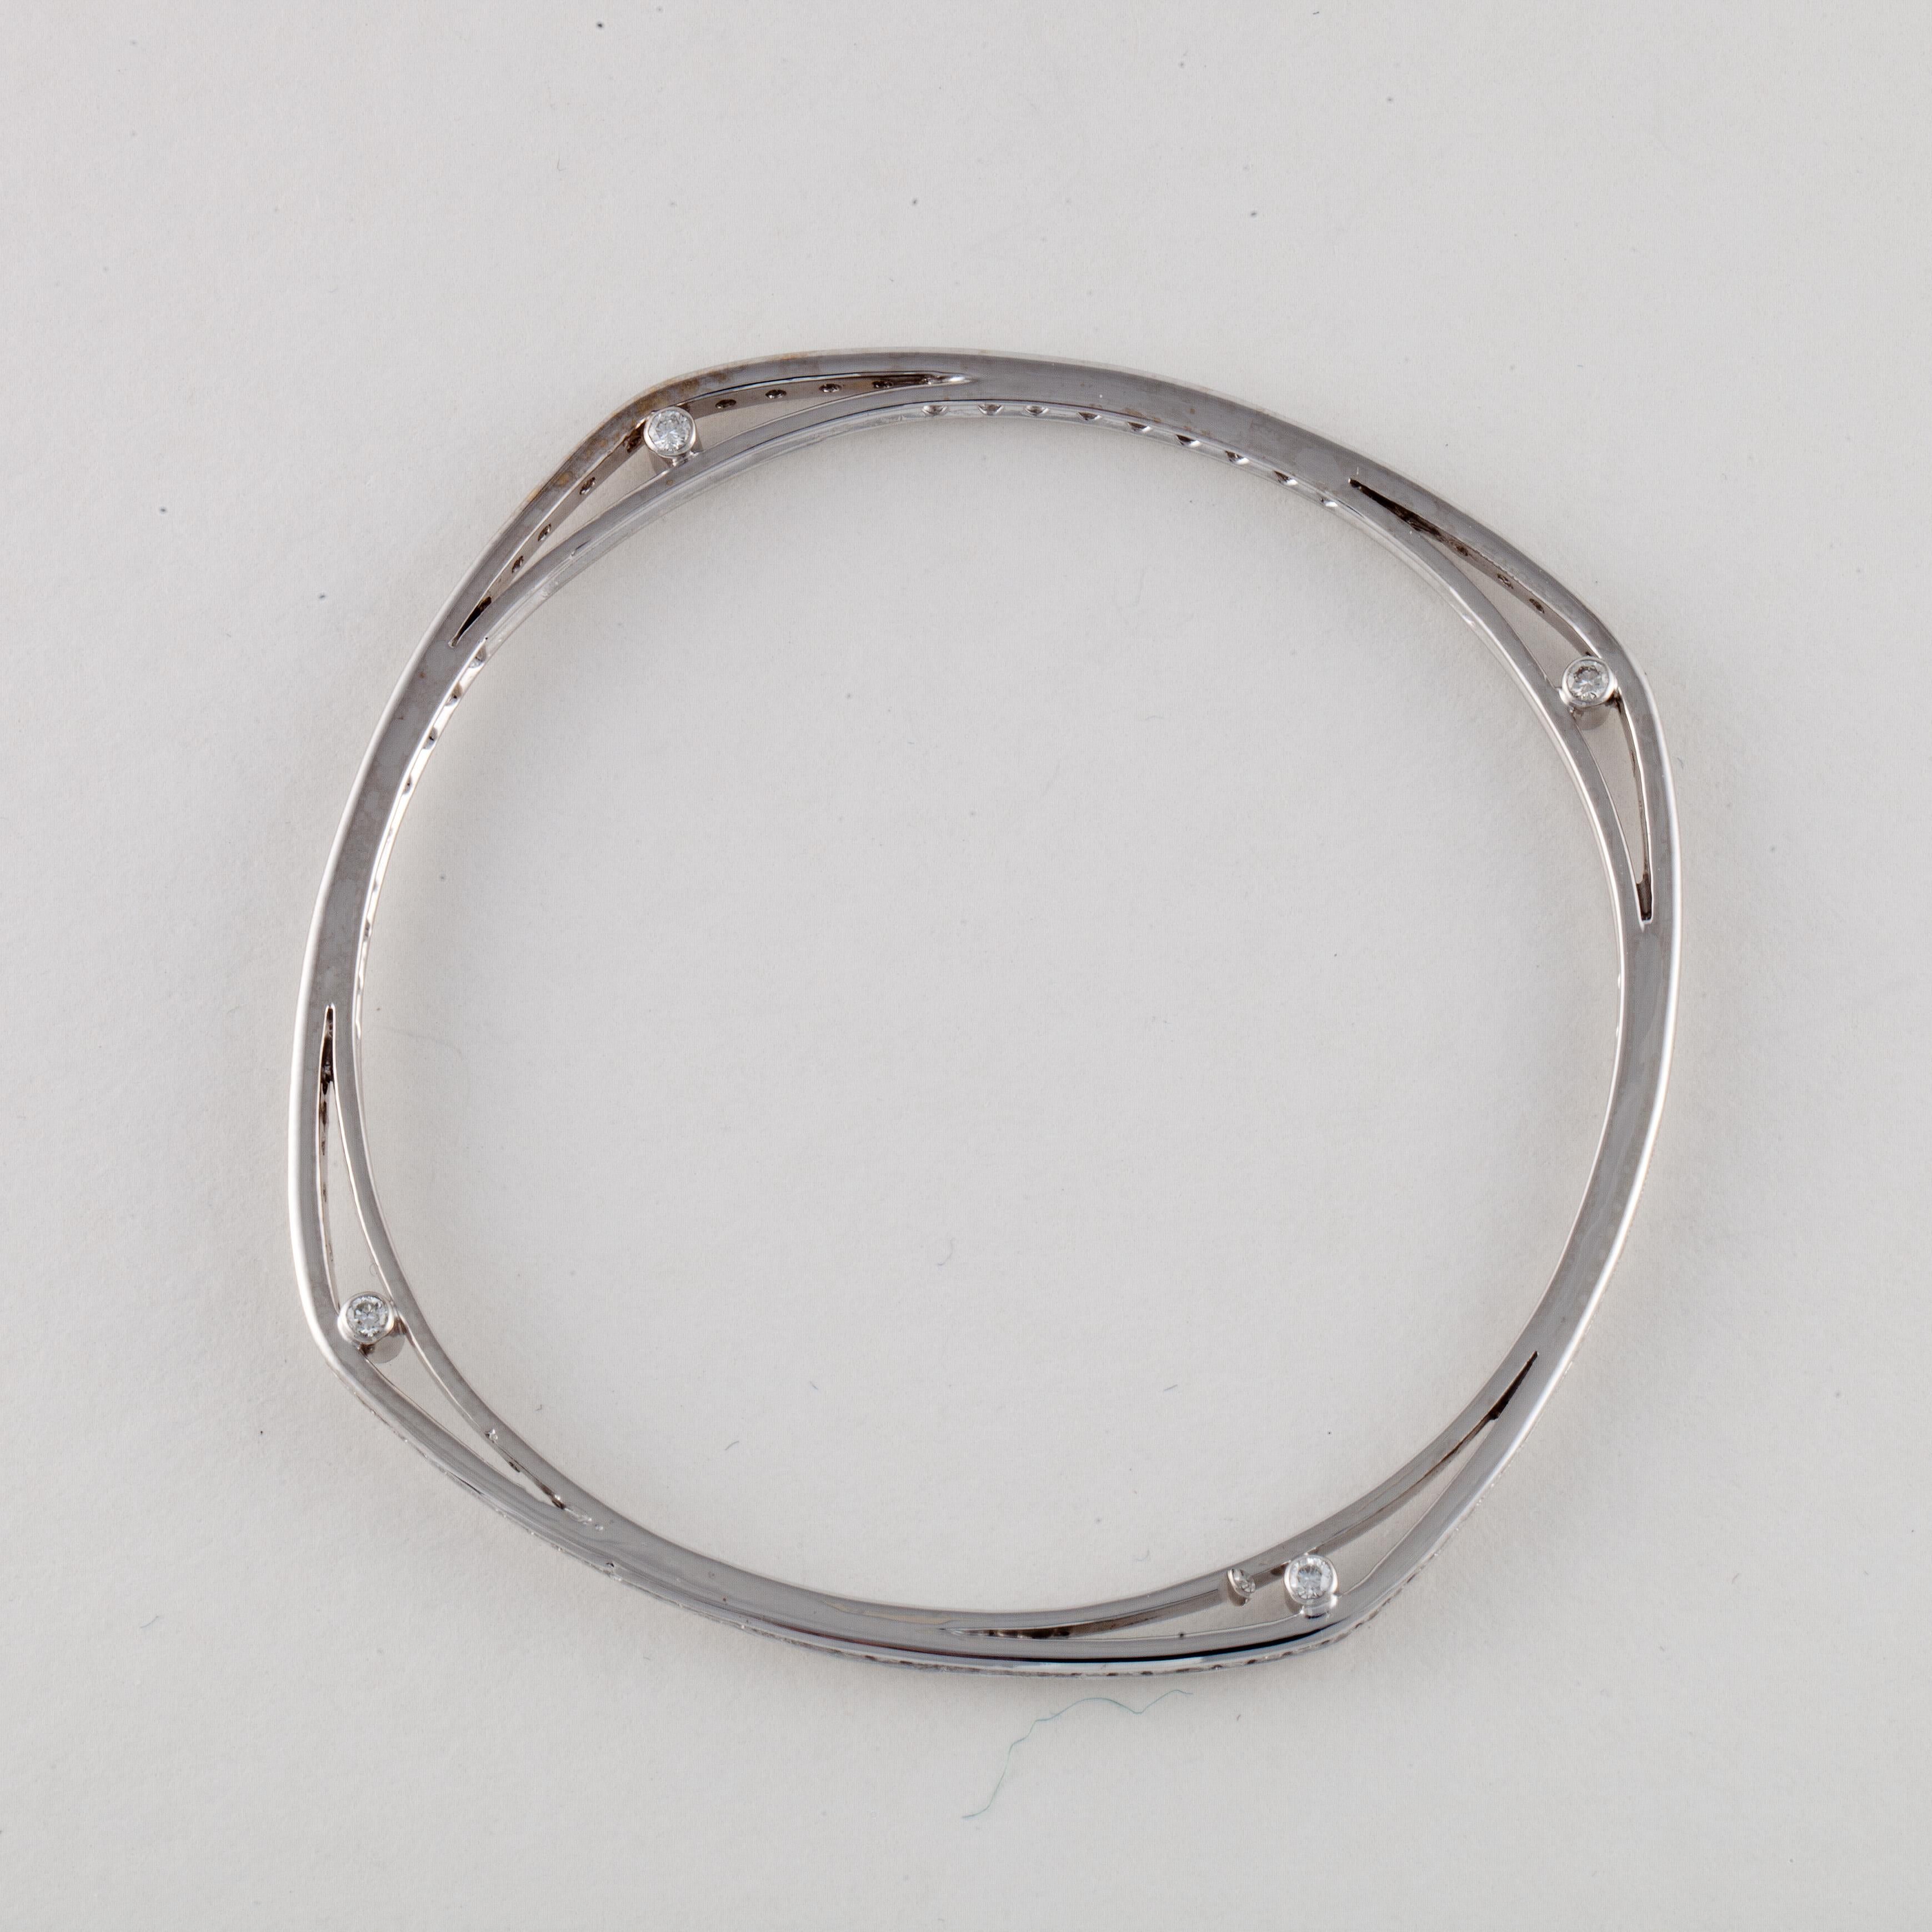 18K white gold diamond bangle in a rounded square shape.  There are diamonds at each corner on both sides as well as around the circumference.  It has 136 round diamonds that total 2.90 carats, G-H color and VS1-VS2 clarity.  The bracelet measures